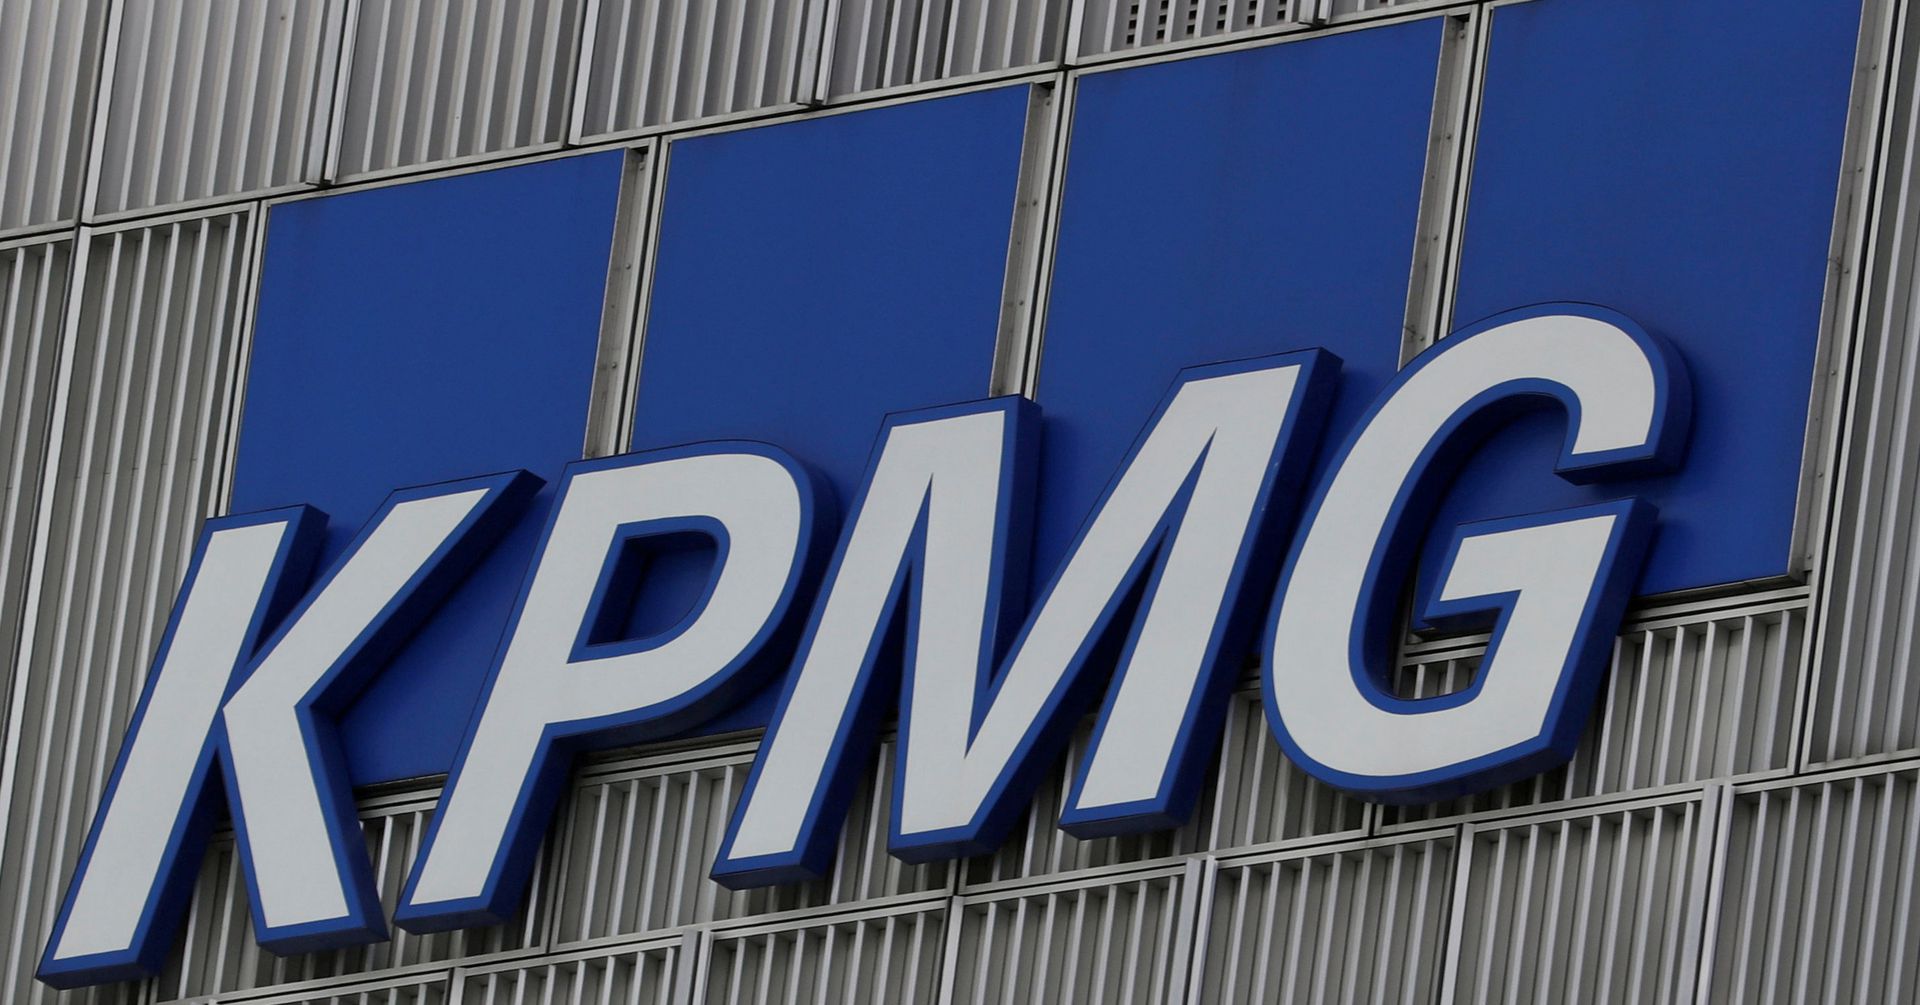 13-facts-about-kpmg